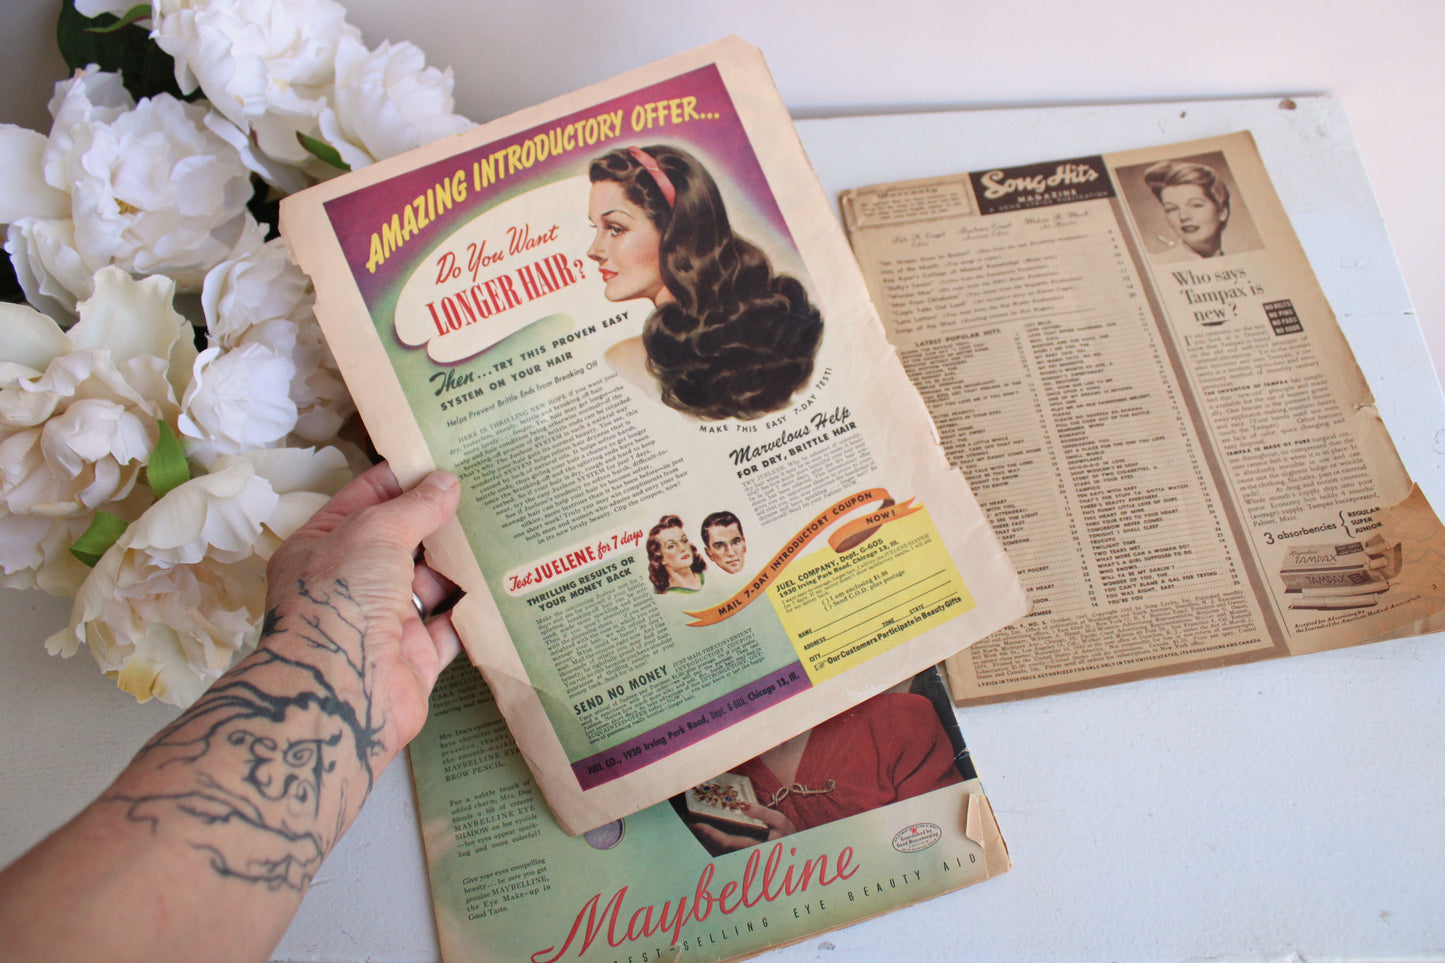 Vintage 1940s Song Magazines